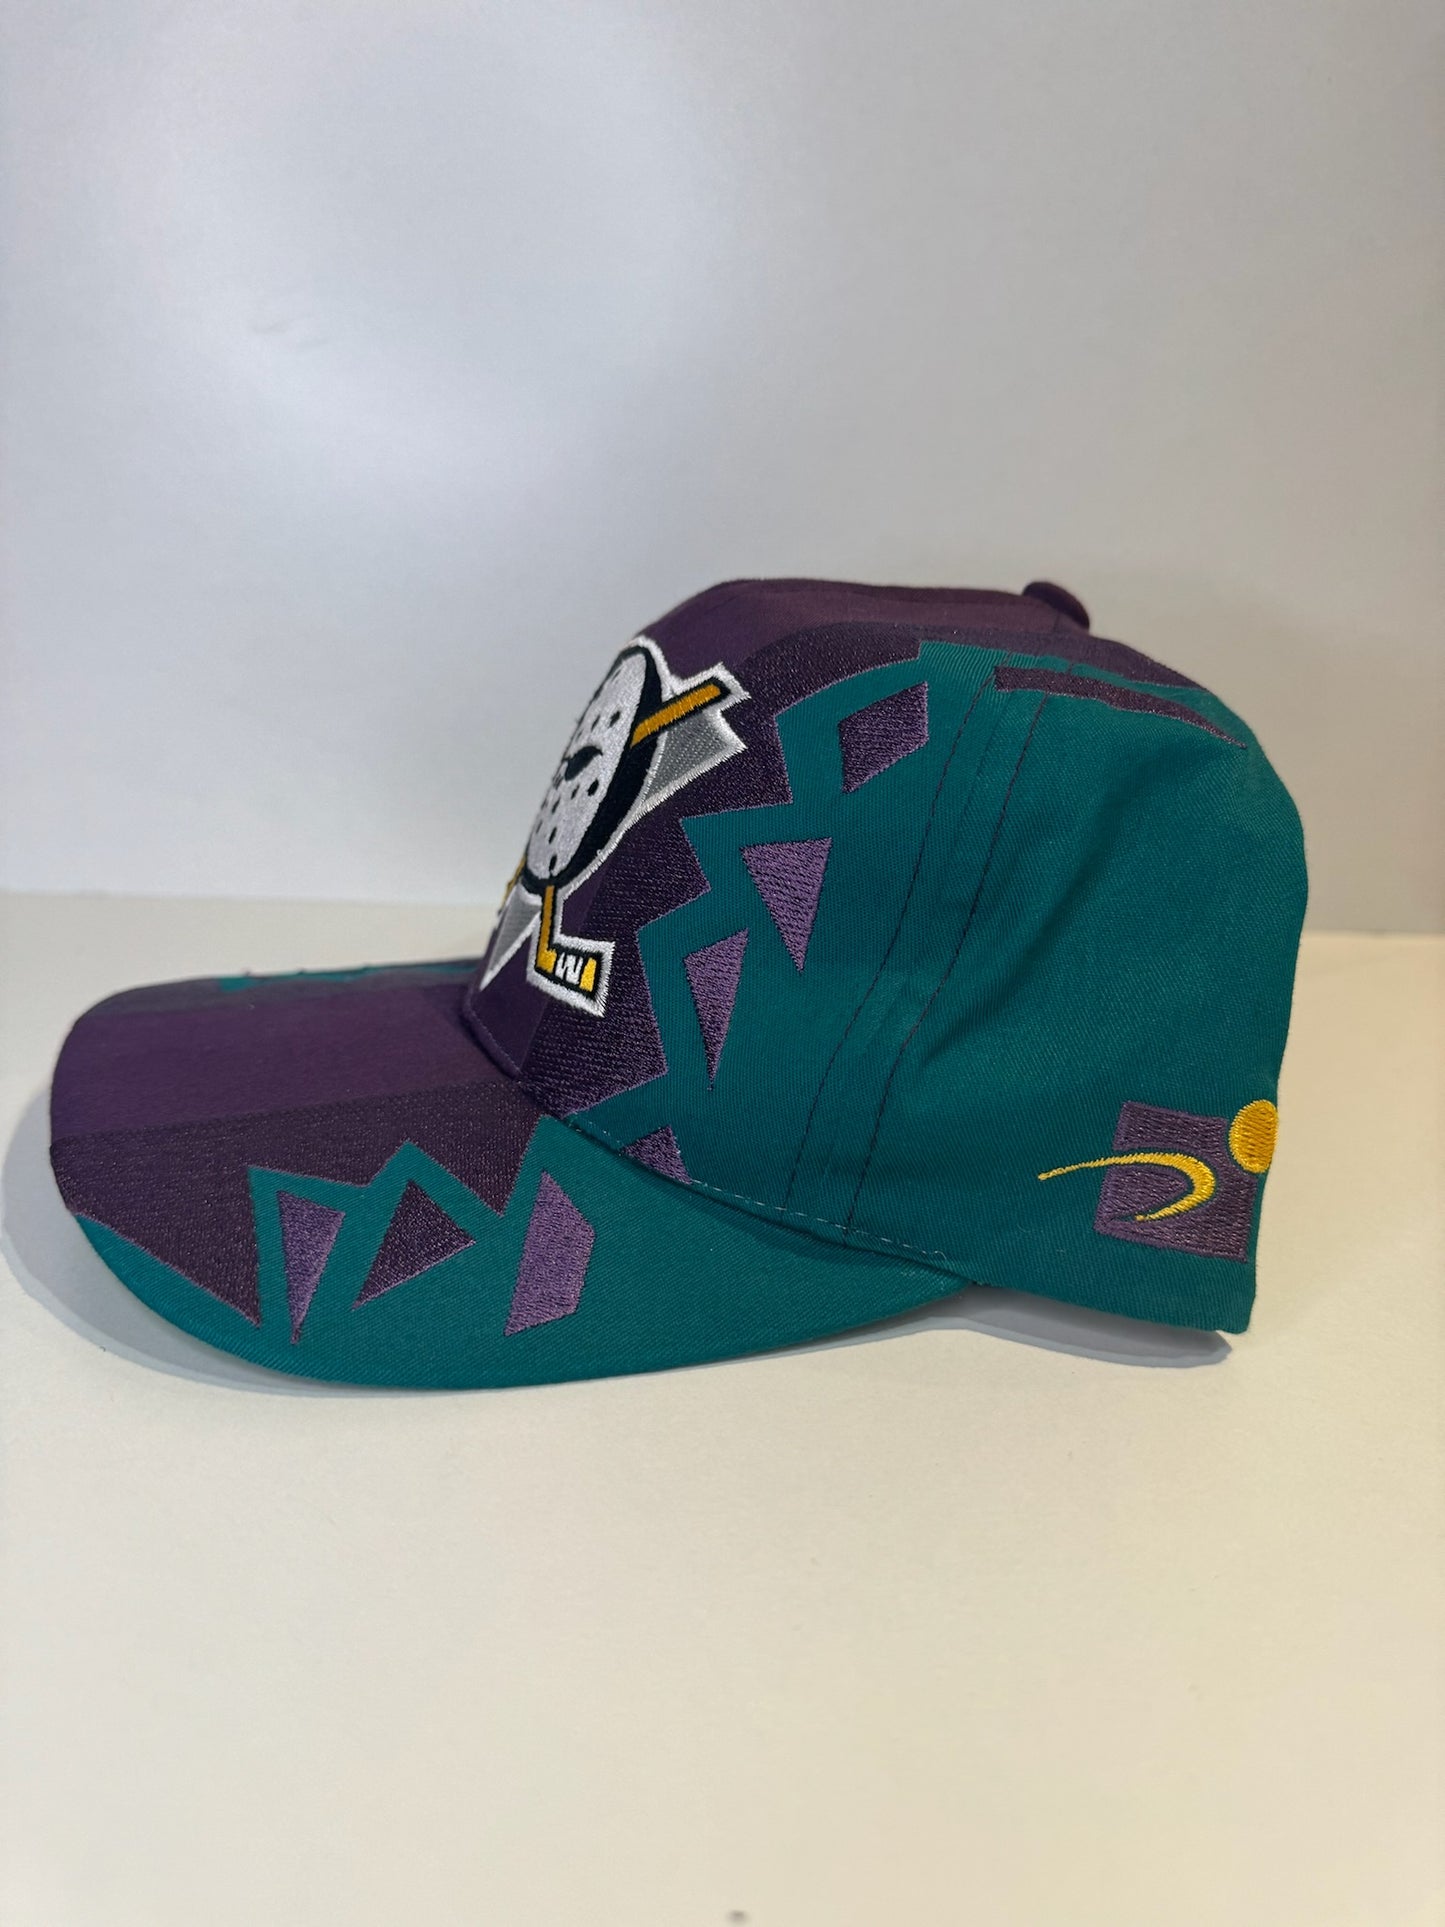 "DS" VINTAGE 90s MIGHTY DUCKS SPORTS SPECIALTIES "SHATTER" SNAPBACK HAT